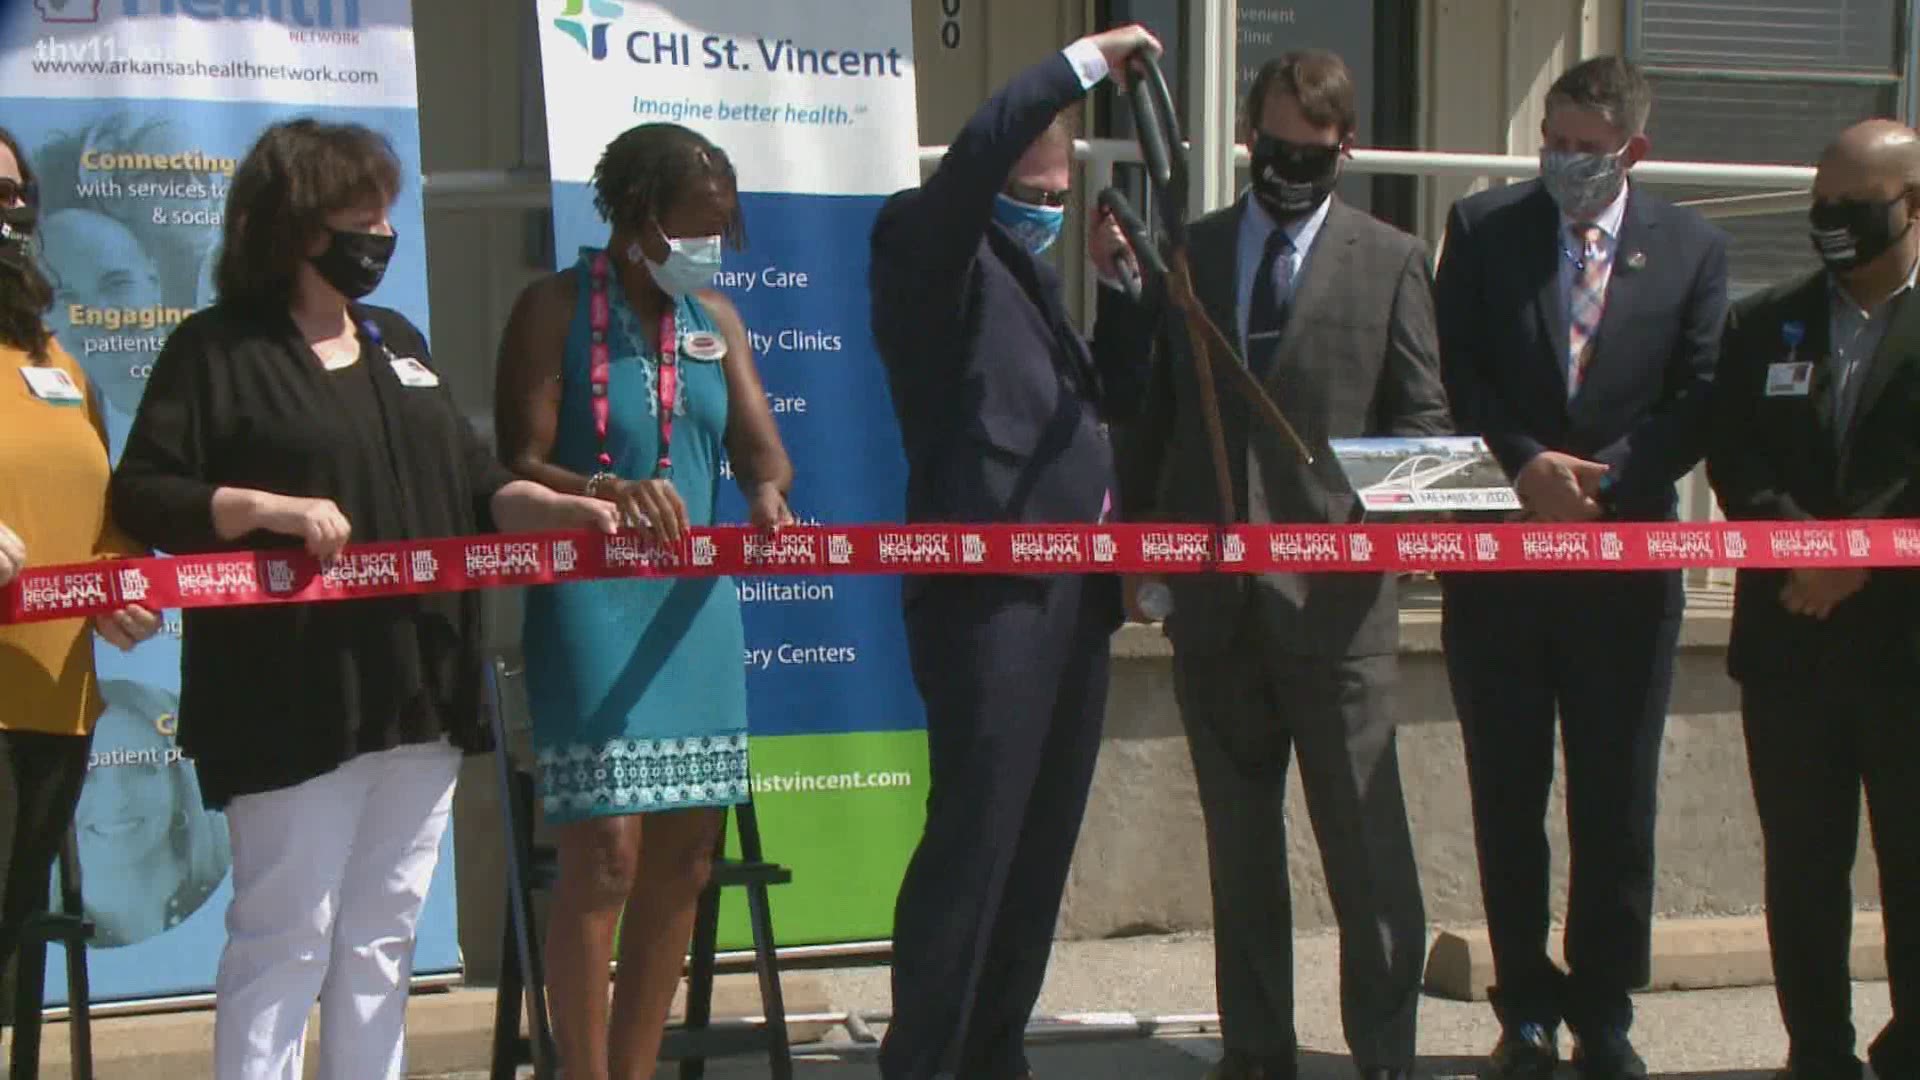 CHI St. Vincent and the Arkansas Health Network host a ribbon-cutting for the new clinic at the Port of Little Rock.